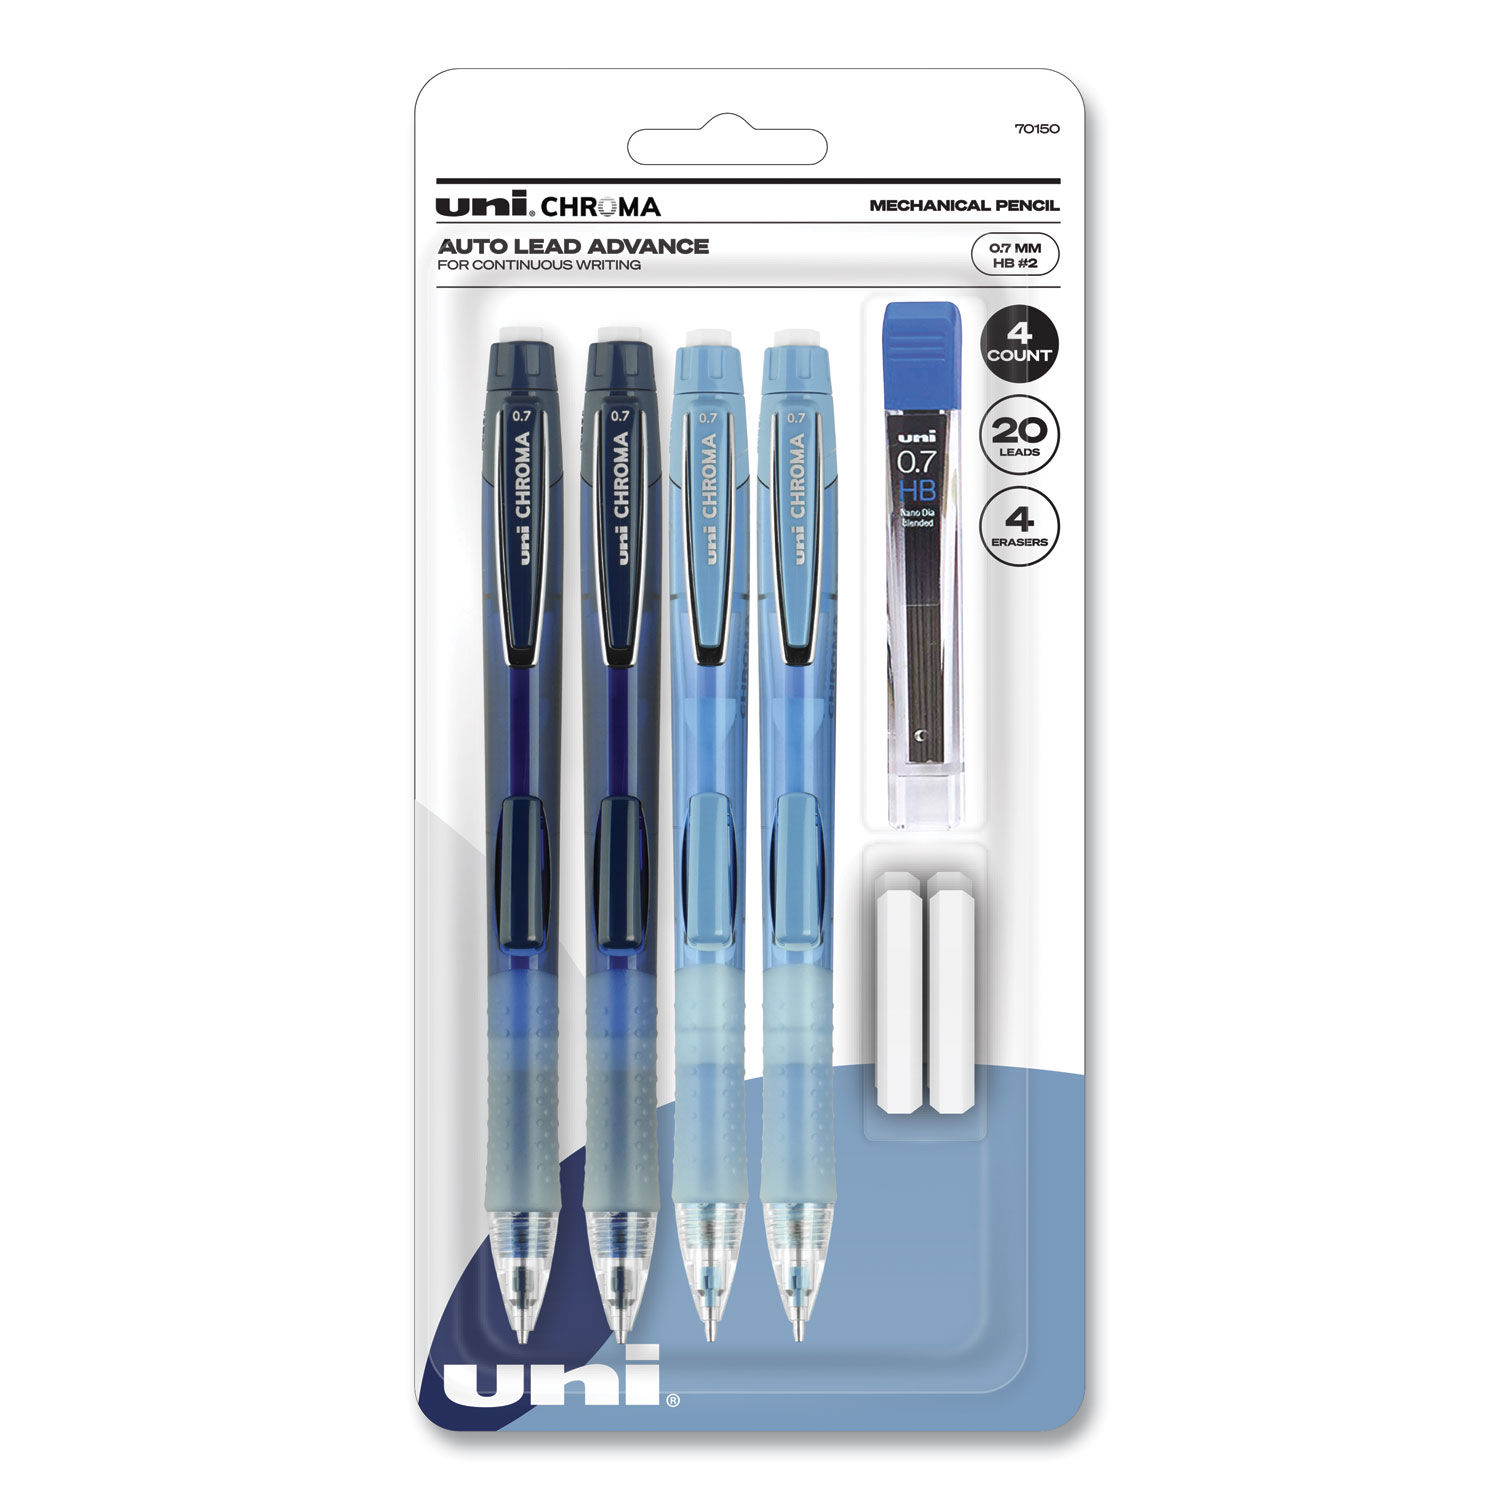 Chroma Mechanical Pencil woth Leasd and Eraser Refills 0.7 mm, HB (#2), Black Lead, Assorted Barrel Colors, 4/Set